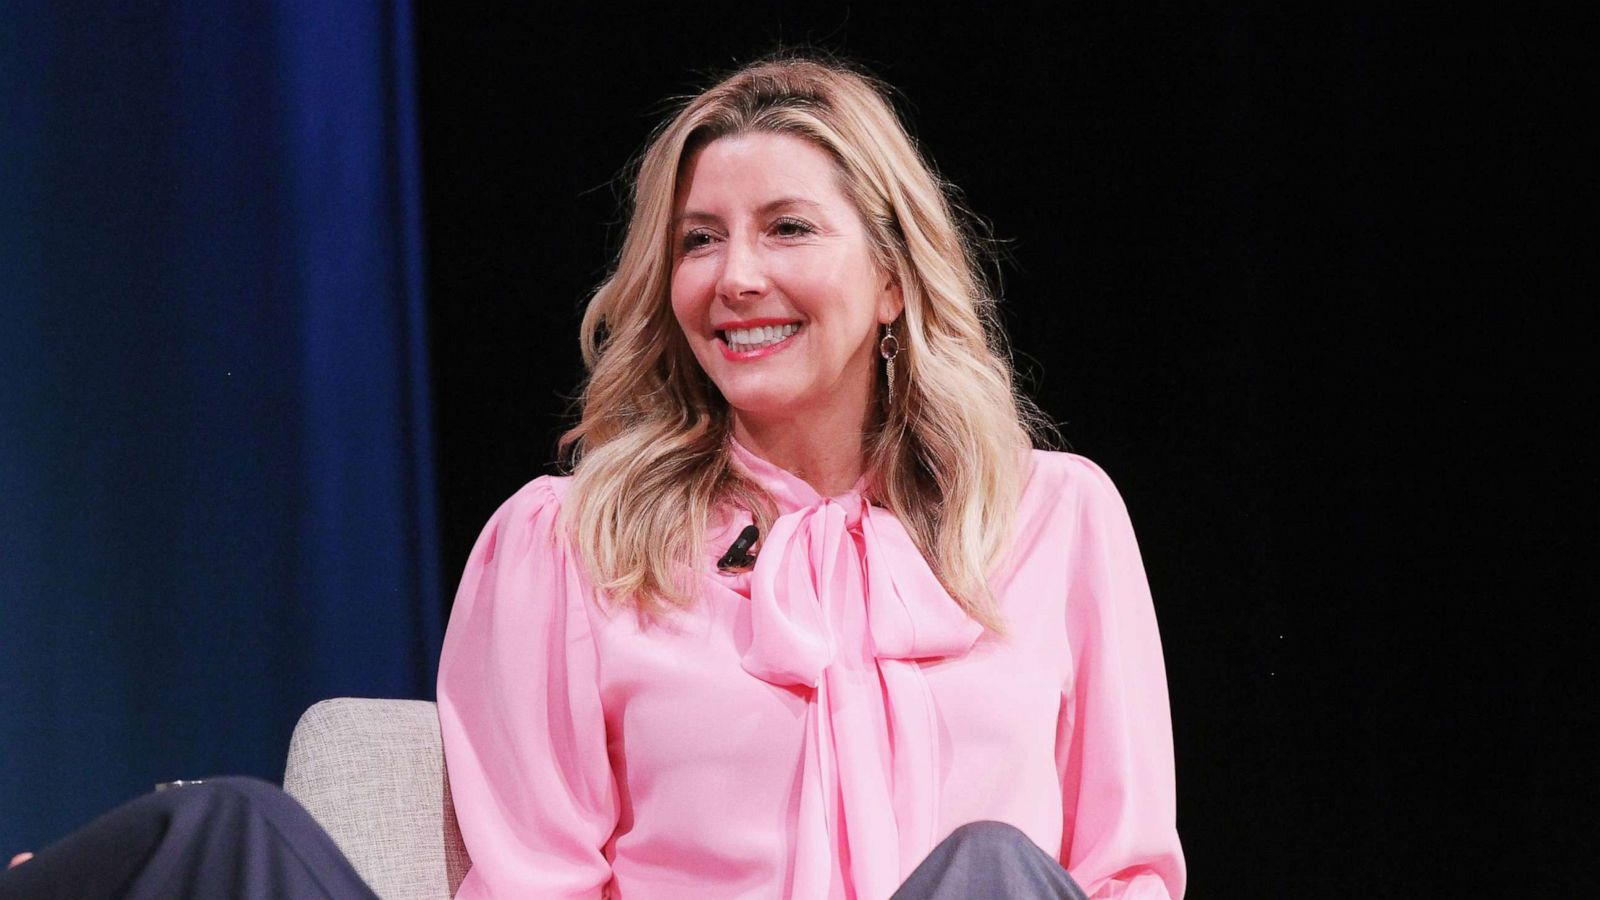 SPANX Founder Sara Blakely on Joining 'Shark Tank': 'I Was Flooded